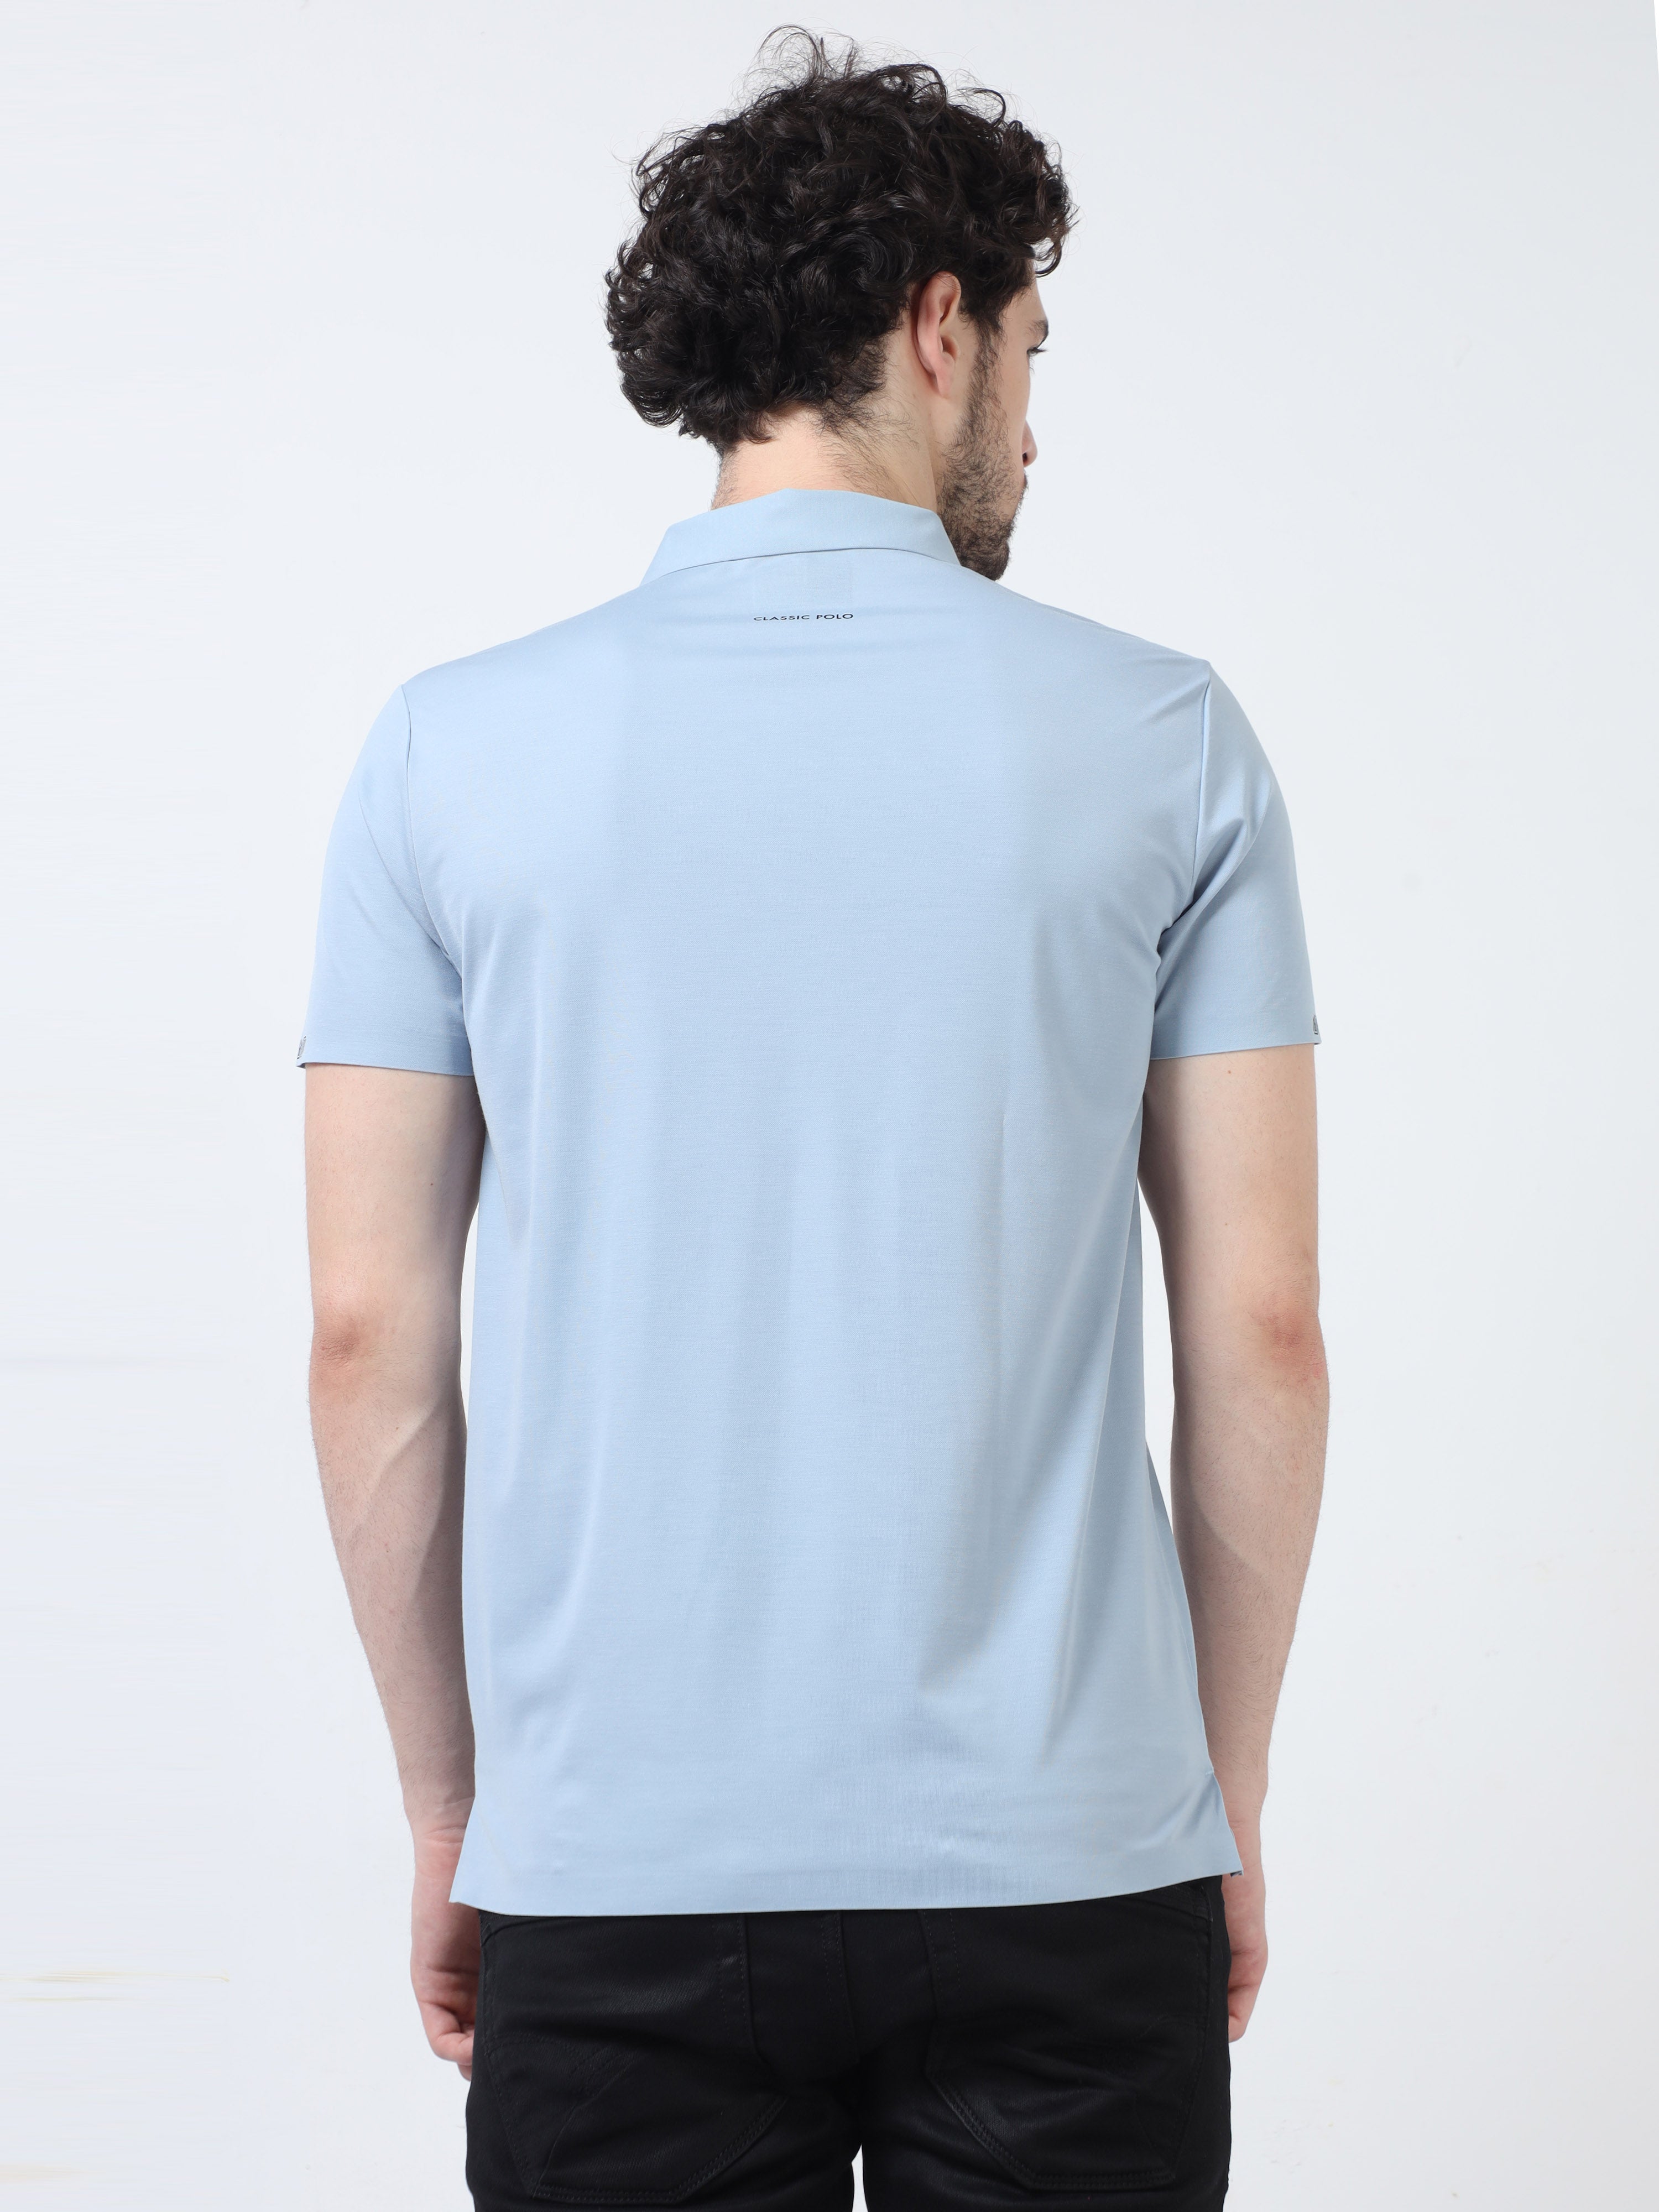 Classic Polo Men's Casual Solid Blue Half Sleeve T-Shirt | UNICO - 98 A SF P